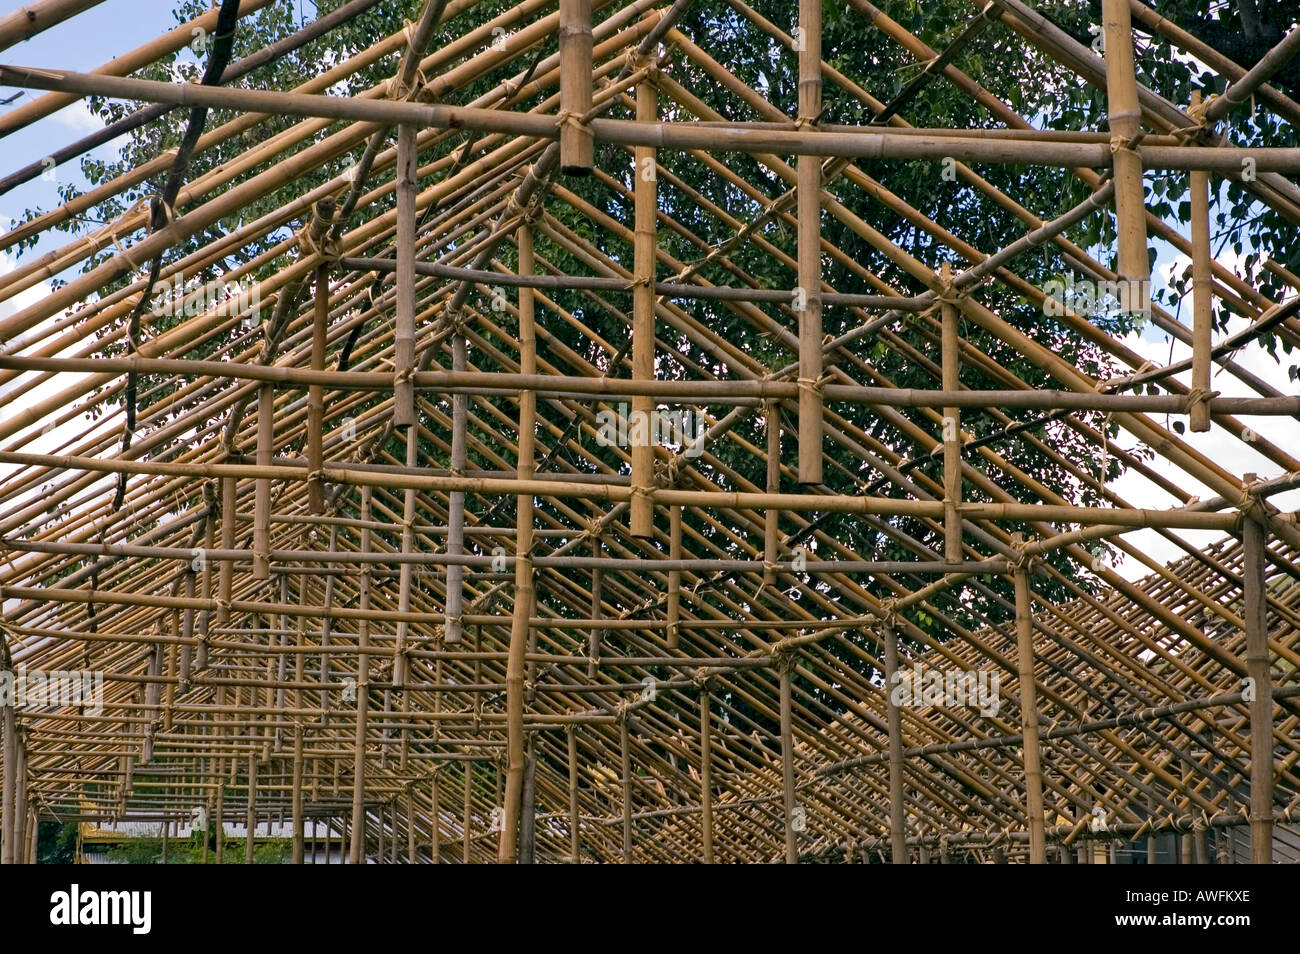 Stock photograph of hand tied bamboo frame for a temporary shelter in Myanmar Stock Photo